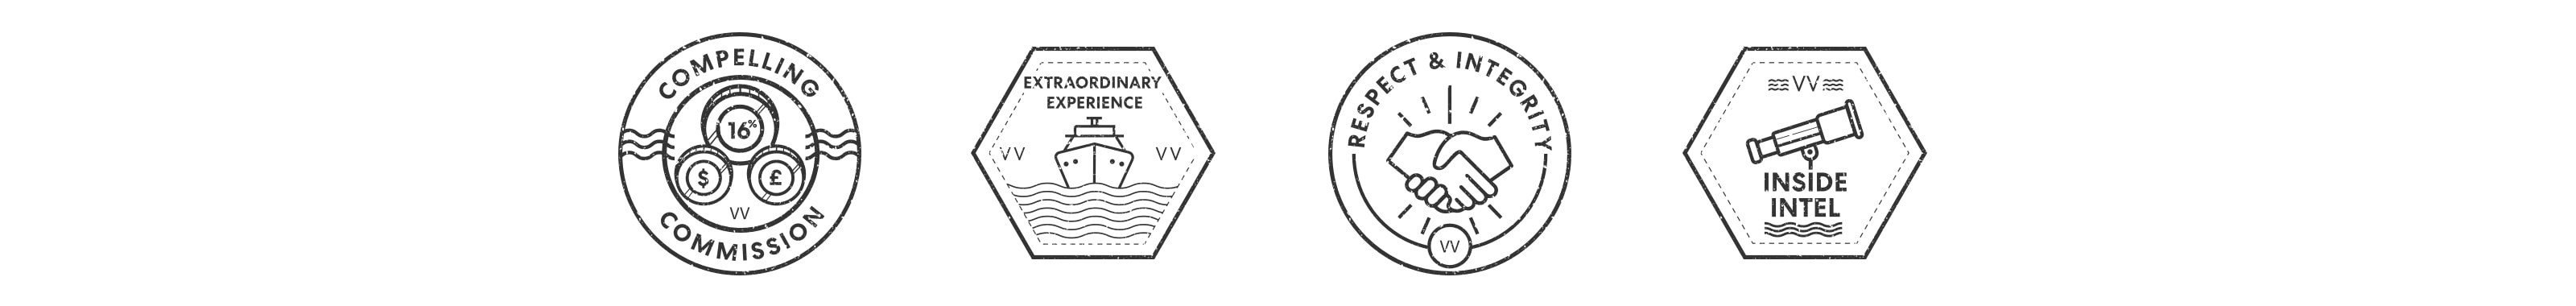 Respect and Integrity Stamps